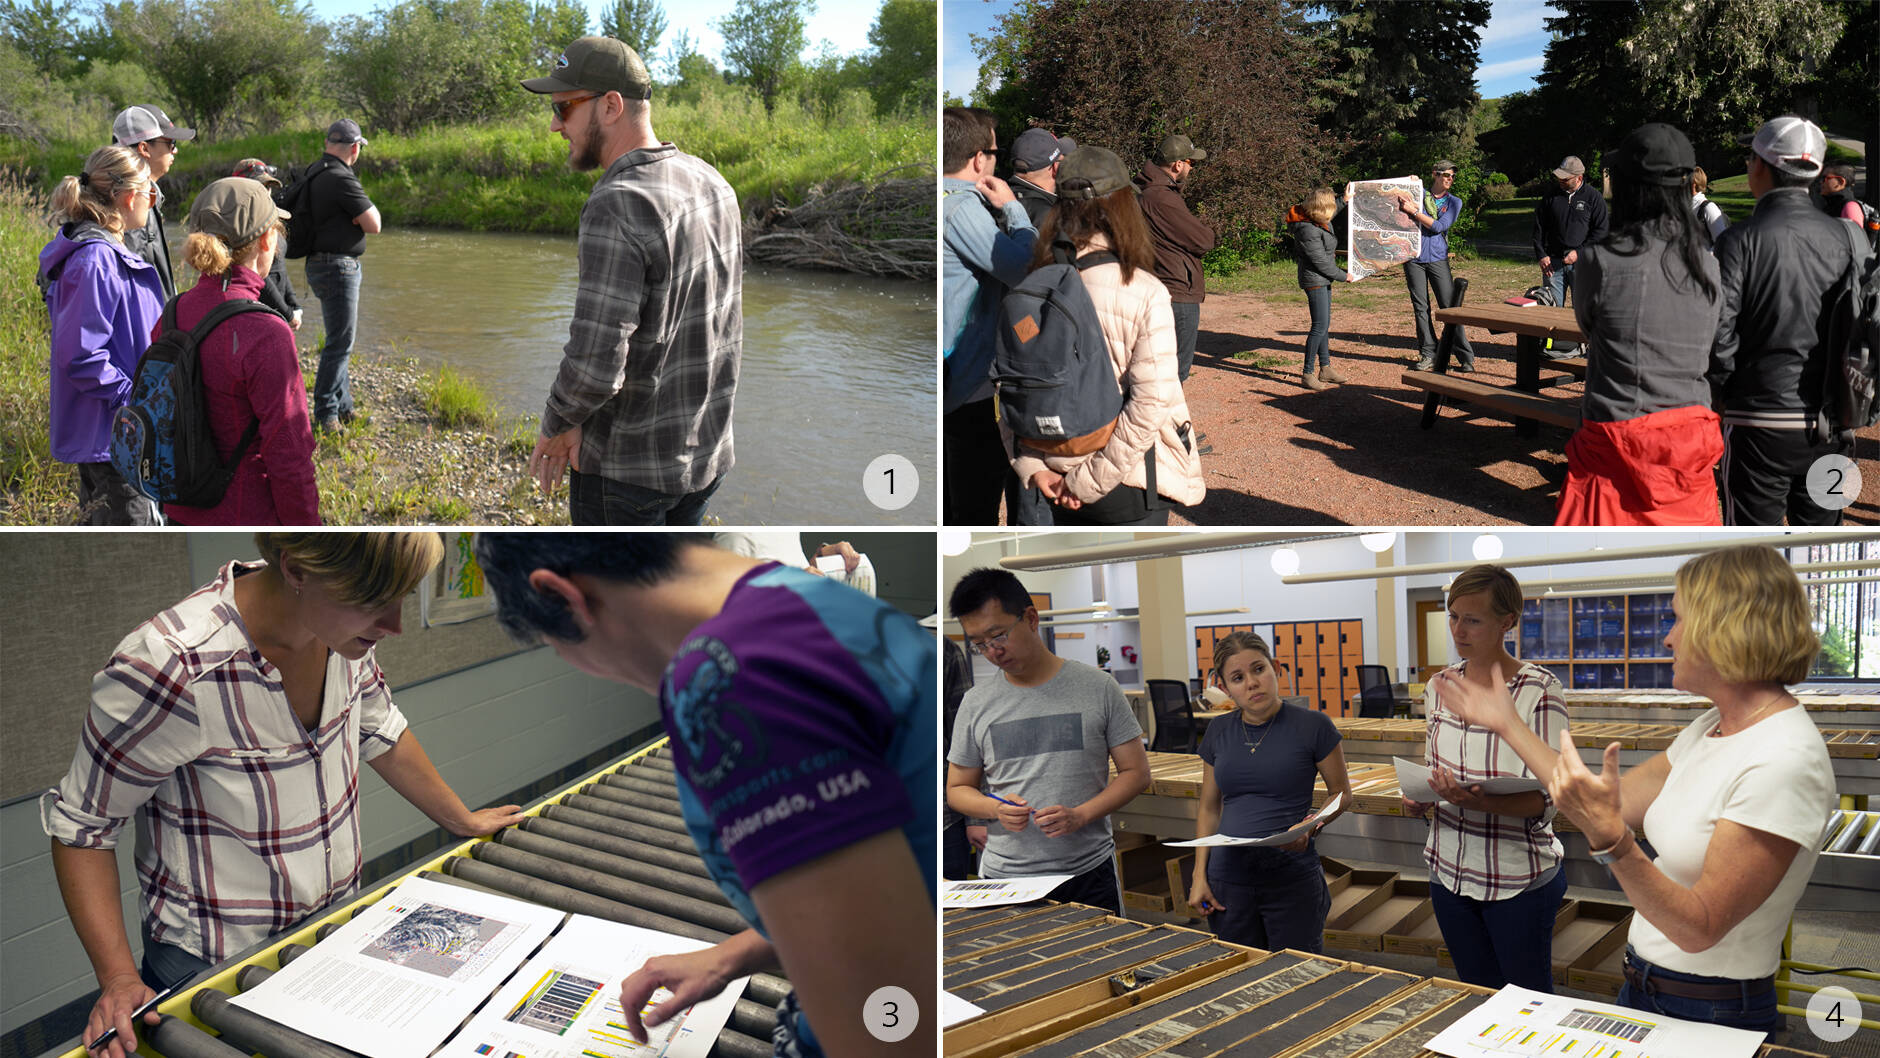 Image Photo— 1. River observation 2. 3D seismic time slice maps and other data connect river features past and present, surface and sub-surface 3. Matching core samples with data logs at the AER research centre 4. McMurray formation data logs and core samples